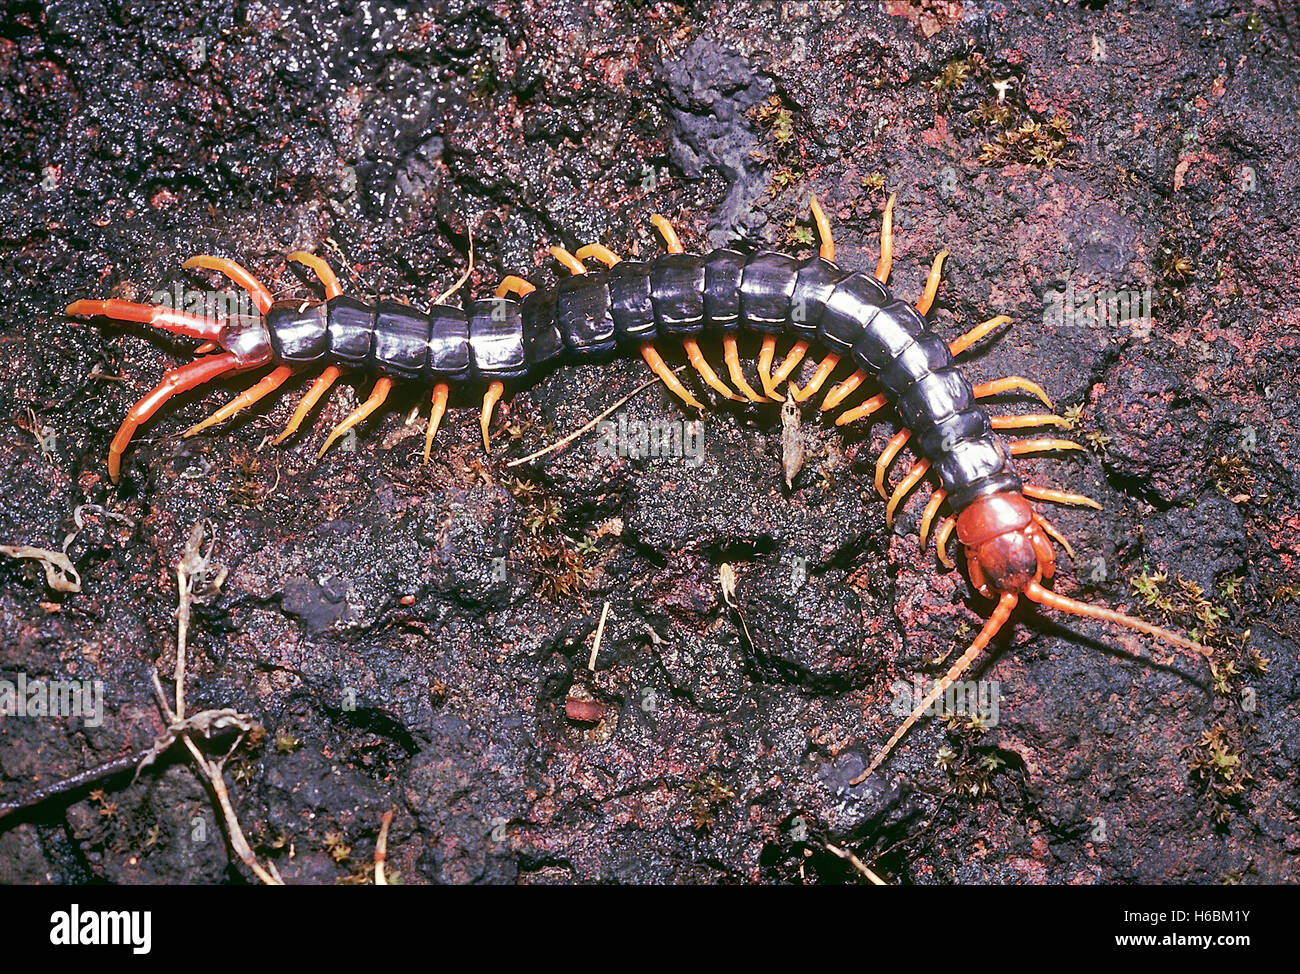 Black centipede. A large black forest centipede photographed in the Koyna forest, India. Stock Photo